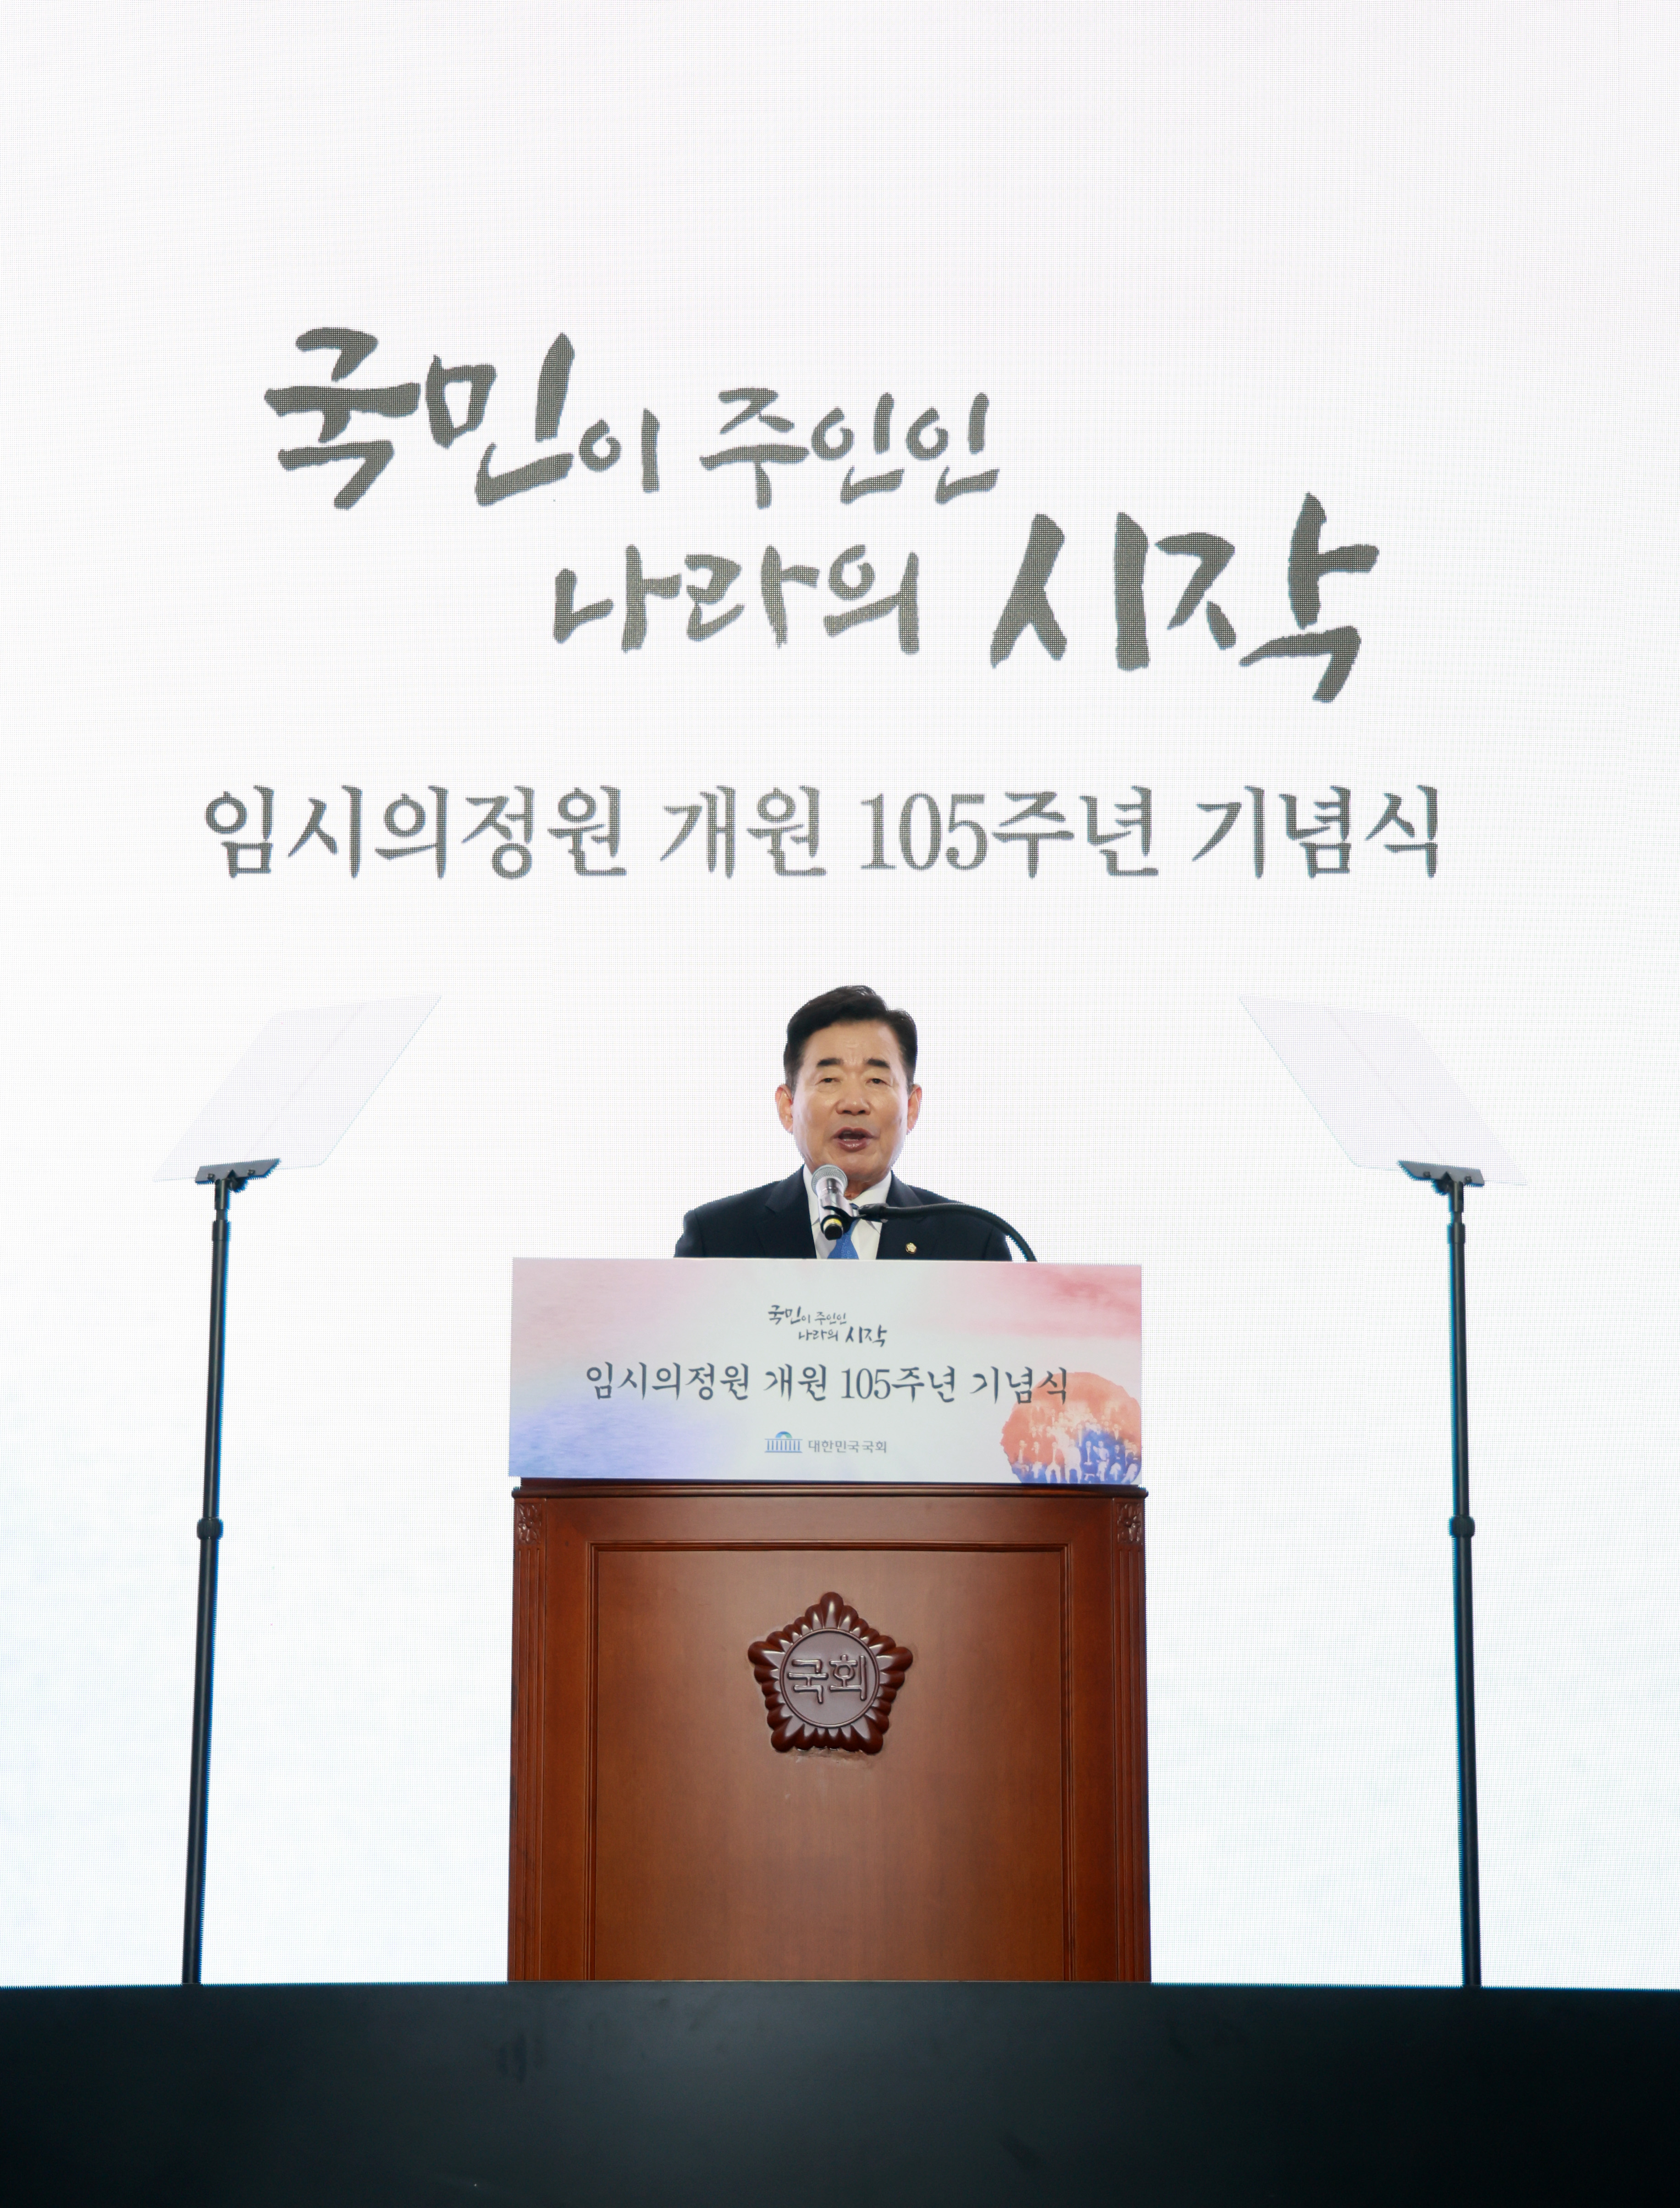 Speaker urges &ldquo;national unity&rdquo; at 105th anniv. of the Provisional Legislative Assembly opening 관련사진 1 보기